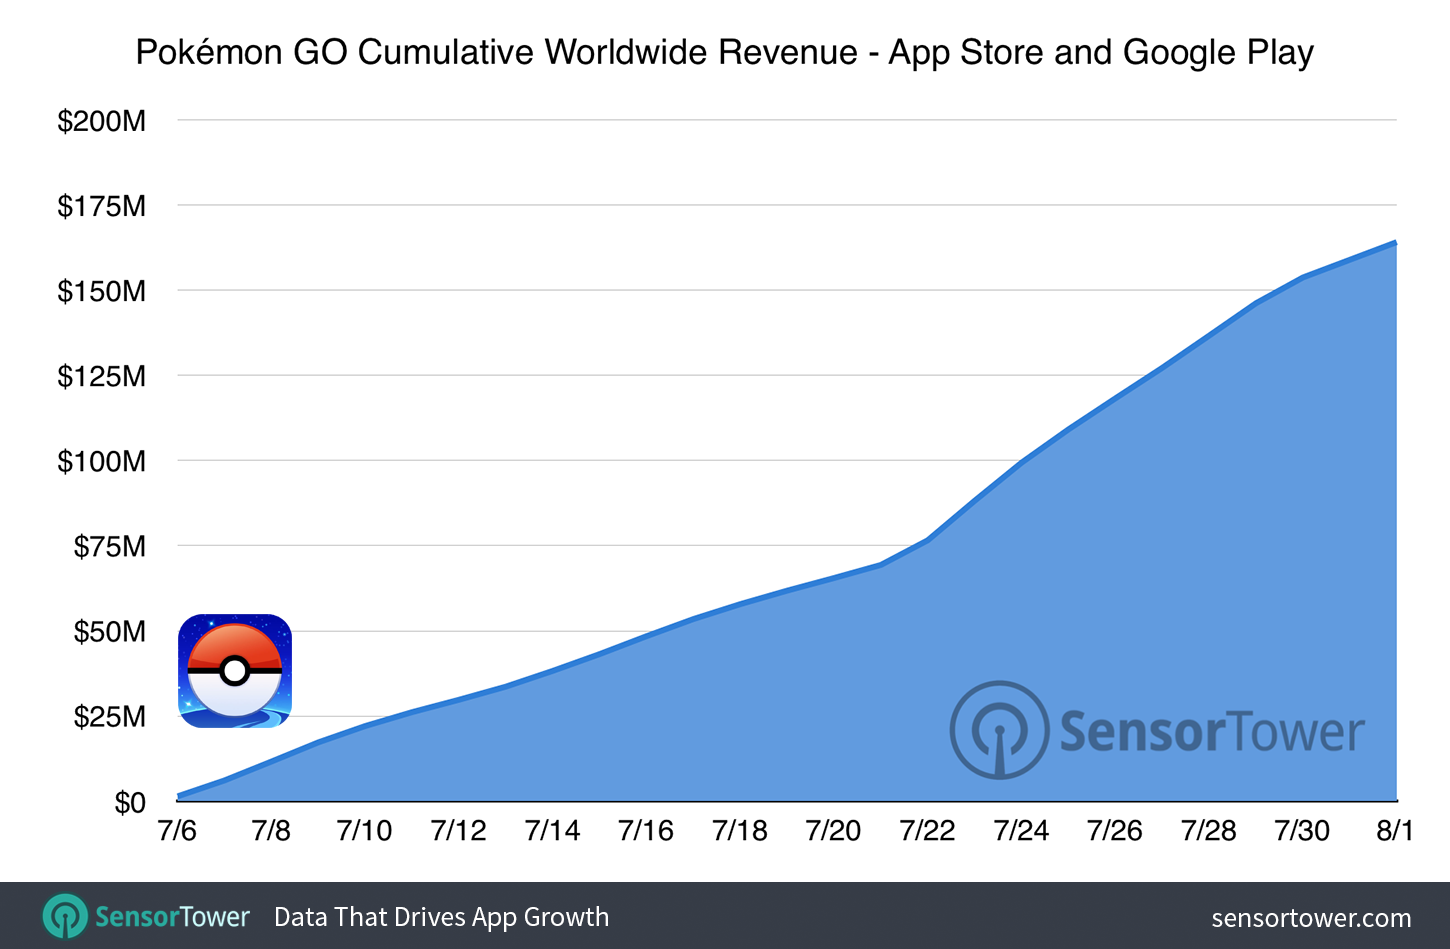 Cumulative Pokemon GO Worldwide Revenue on the App Store and Google Play Since Launch